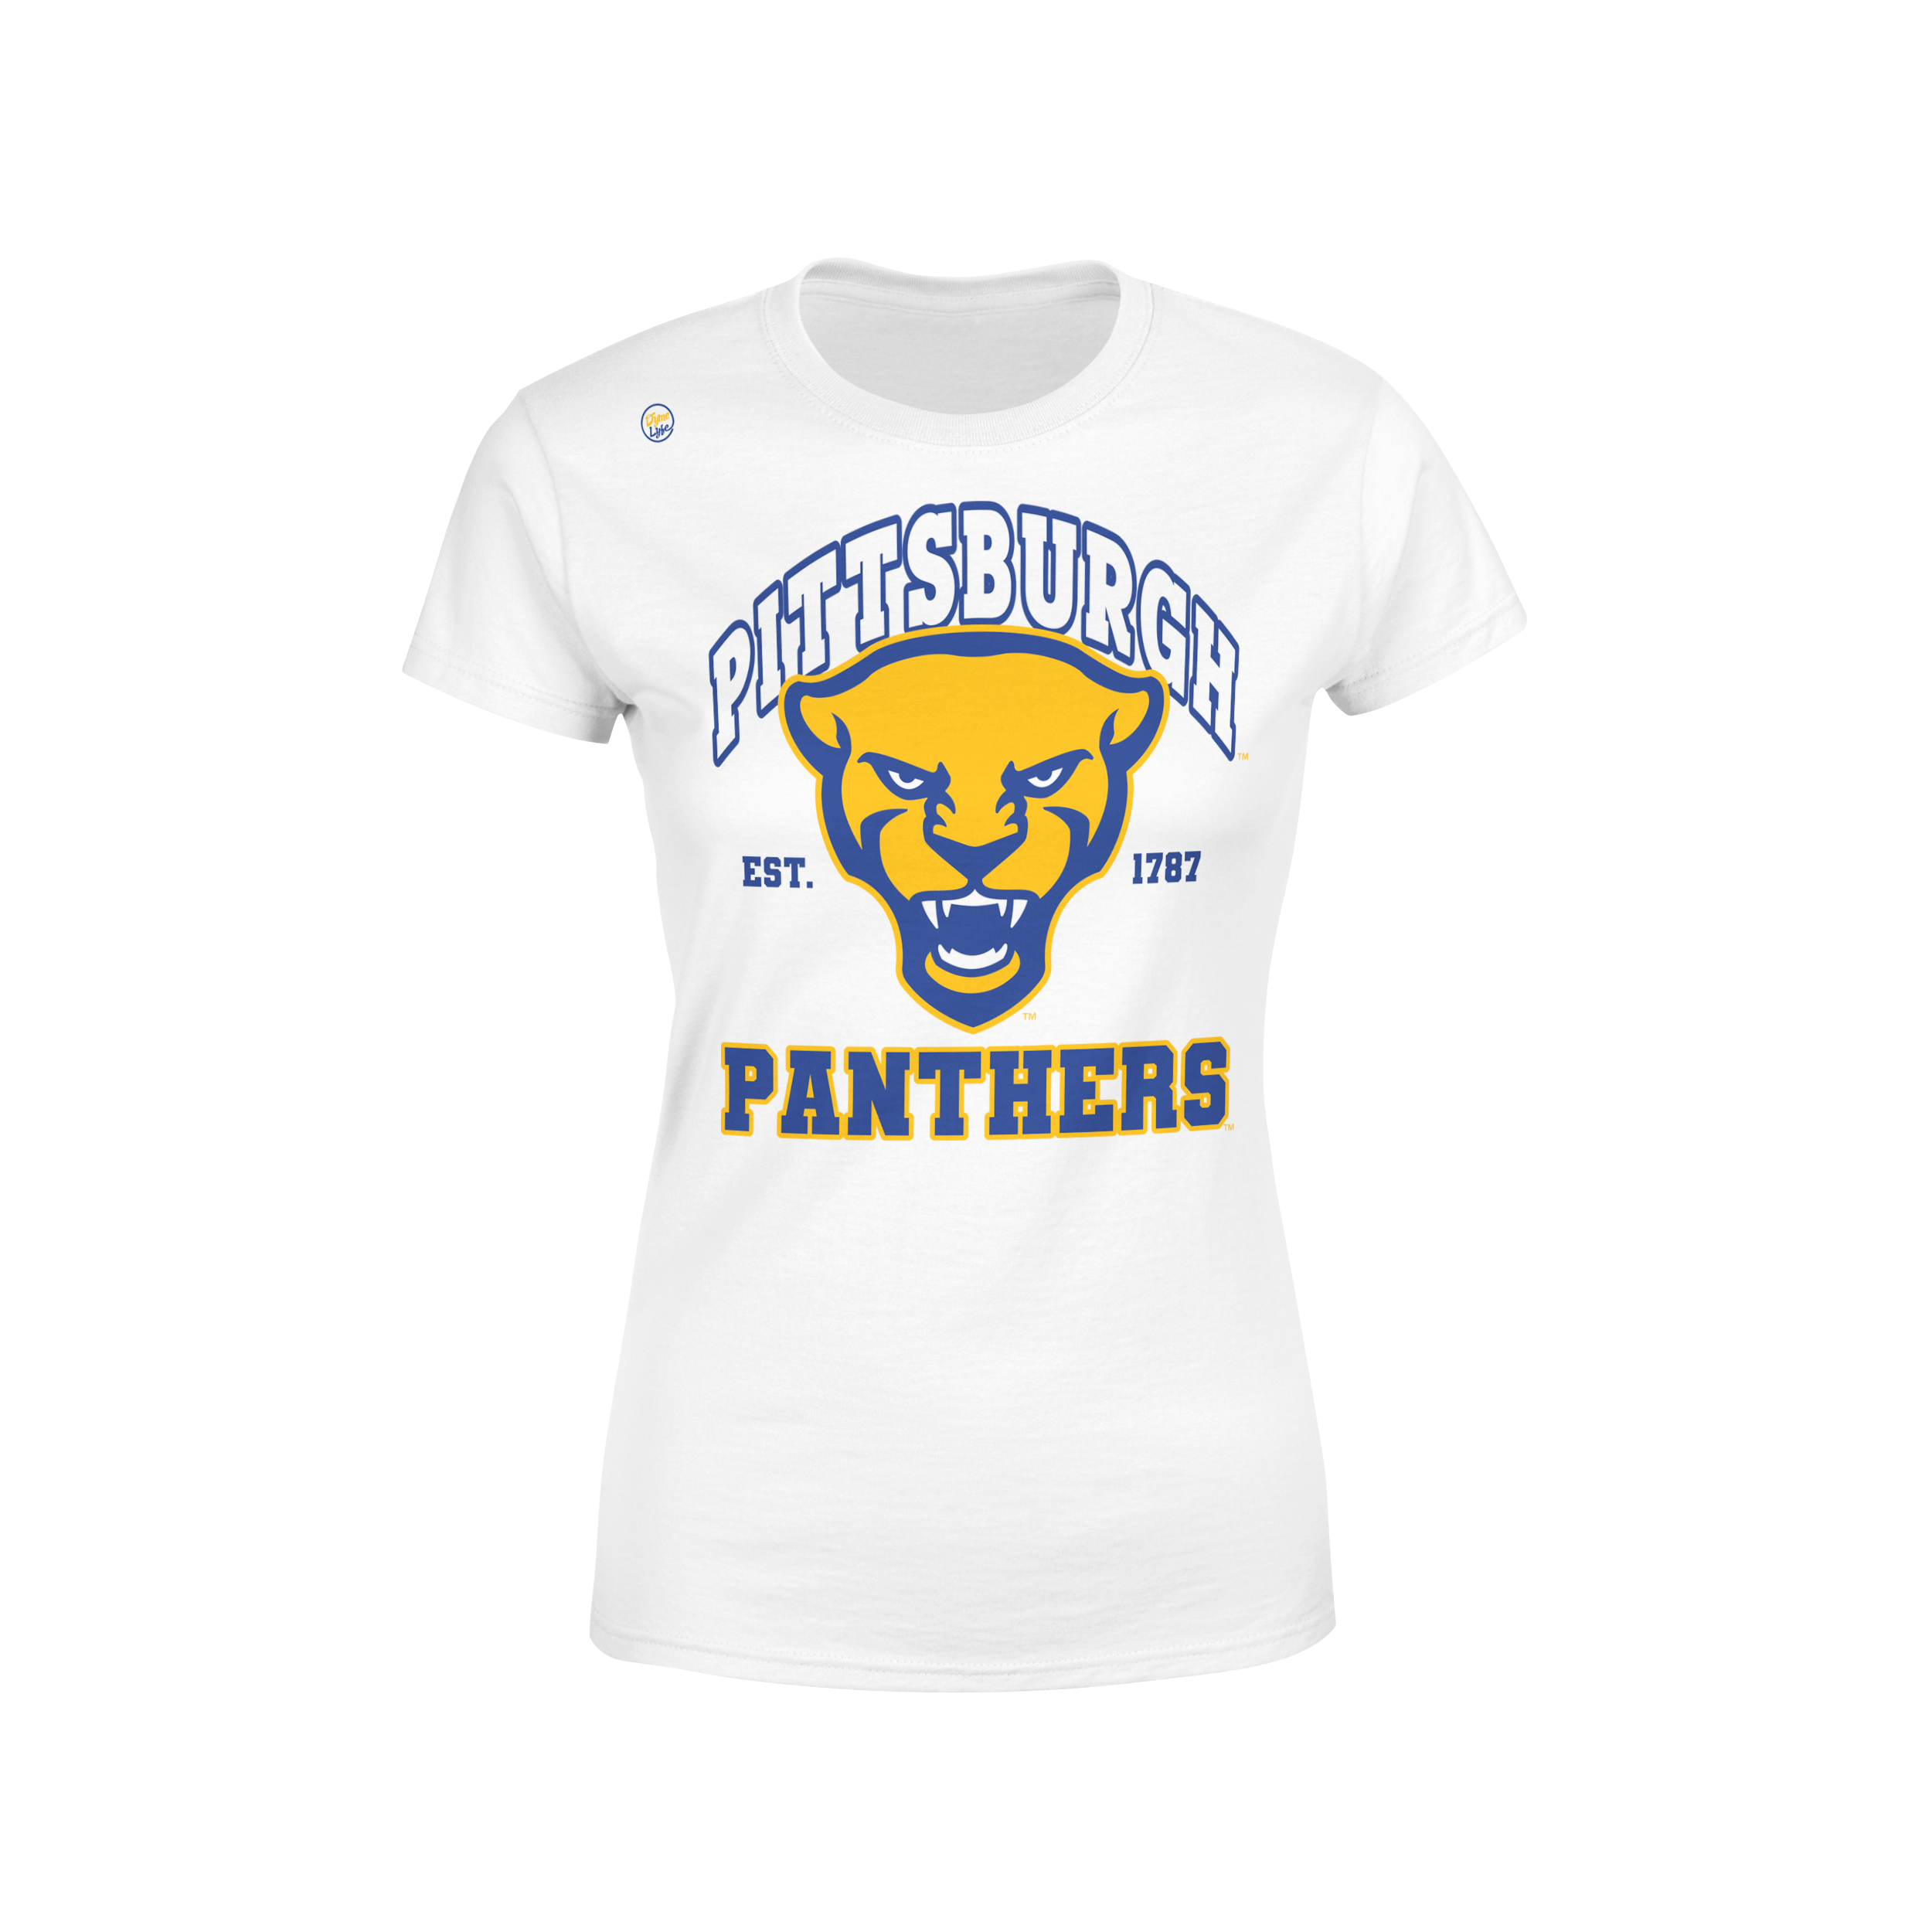 Pittsburgh Panthers Women’s Est. Tee